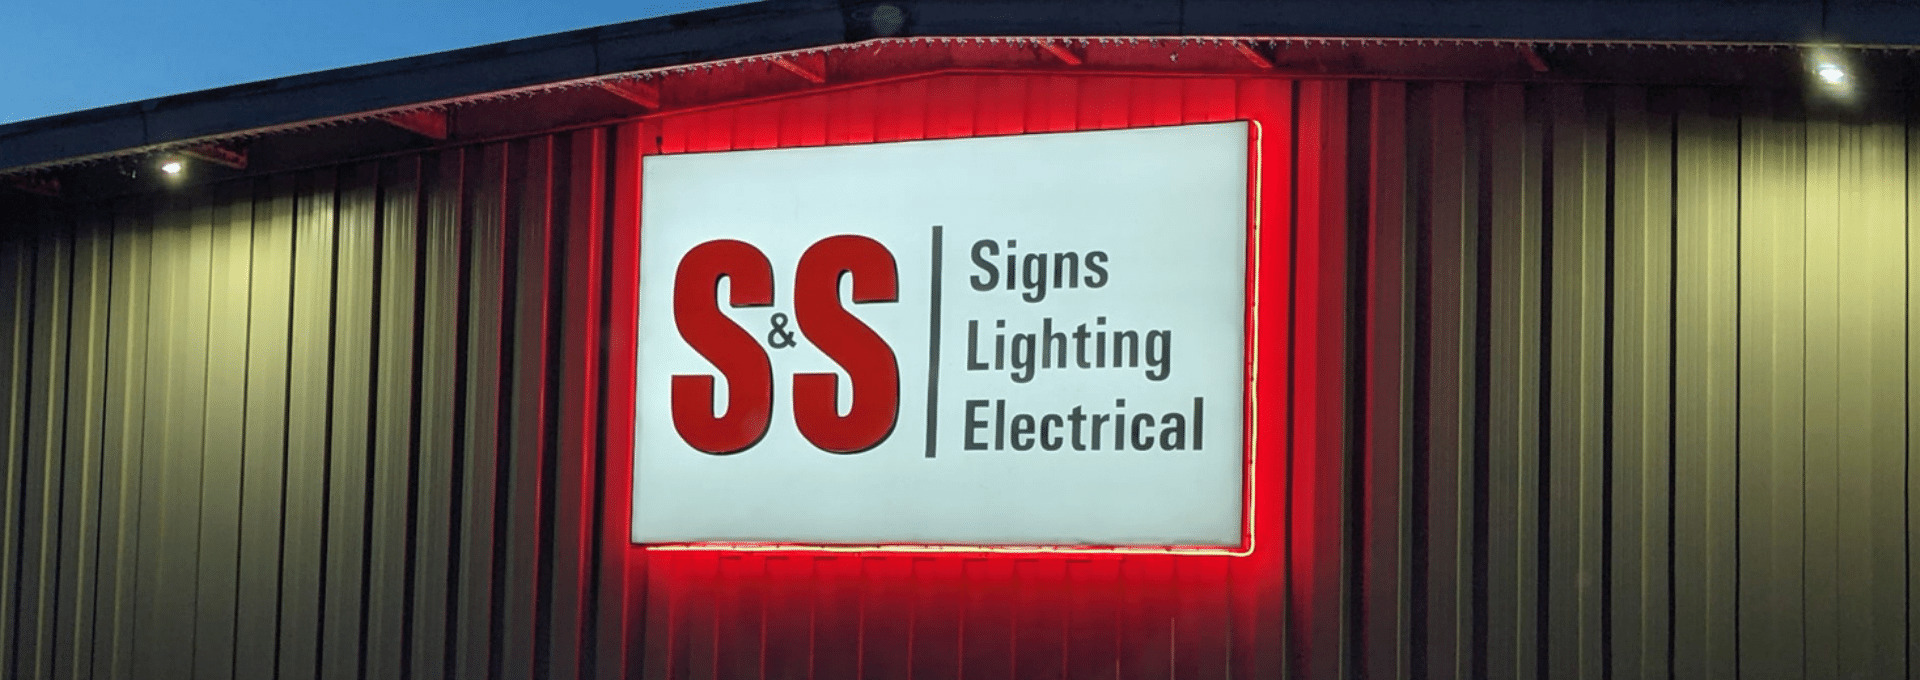 Light Up Trusted Brand with S & S Custom Sign Company: Peoria's Leading Lighting & Electrical Contractors